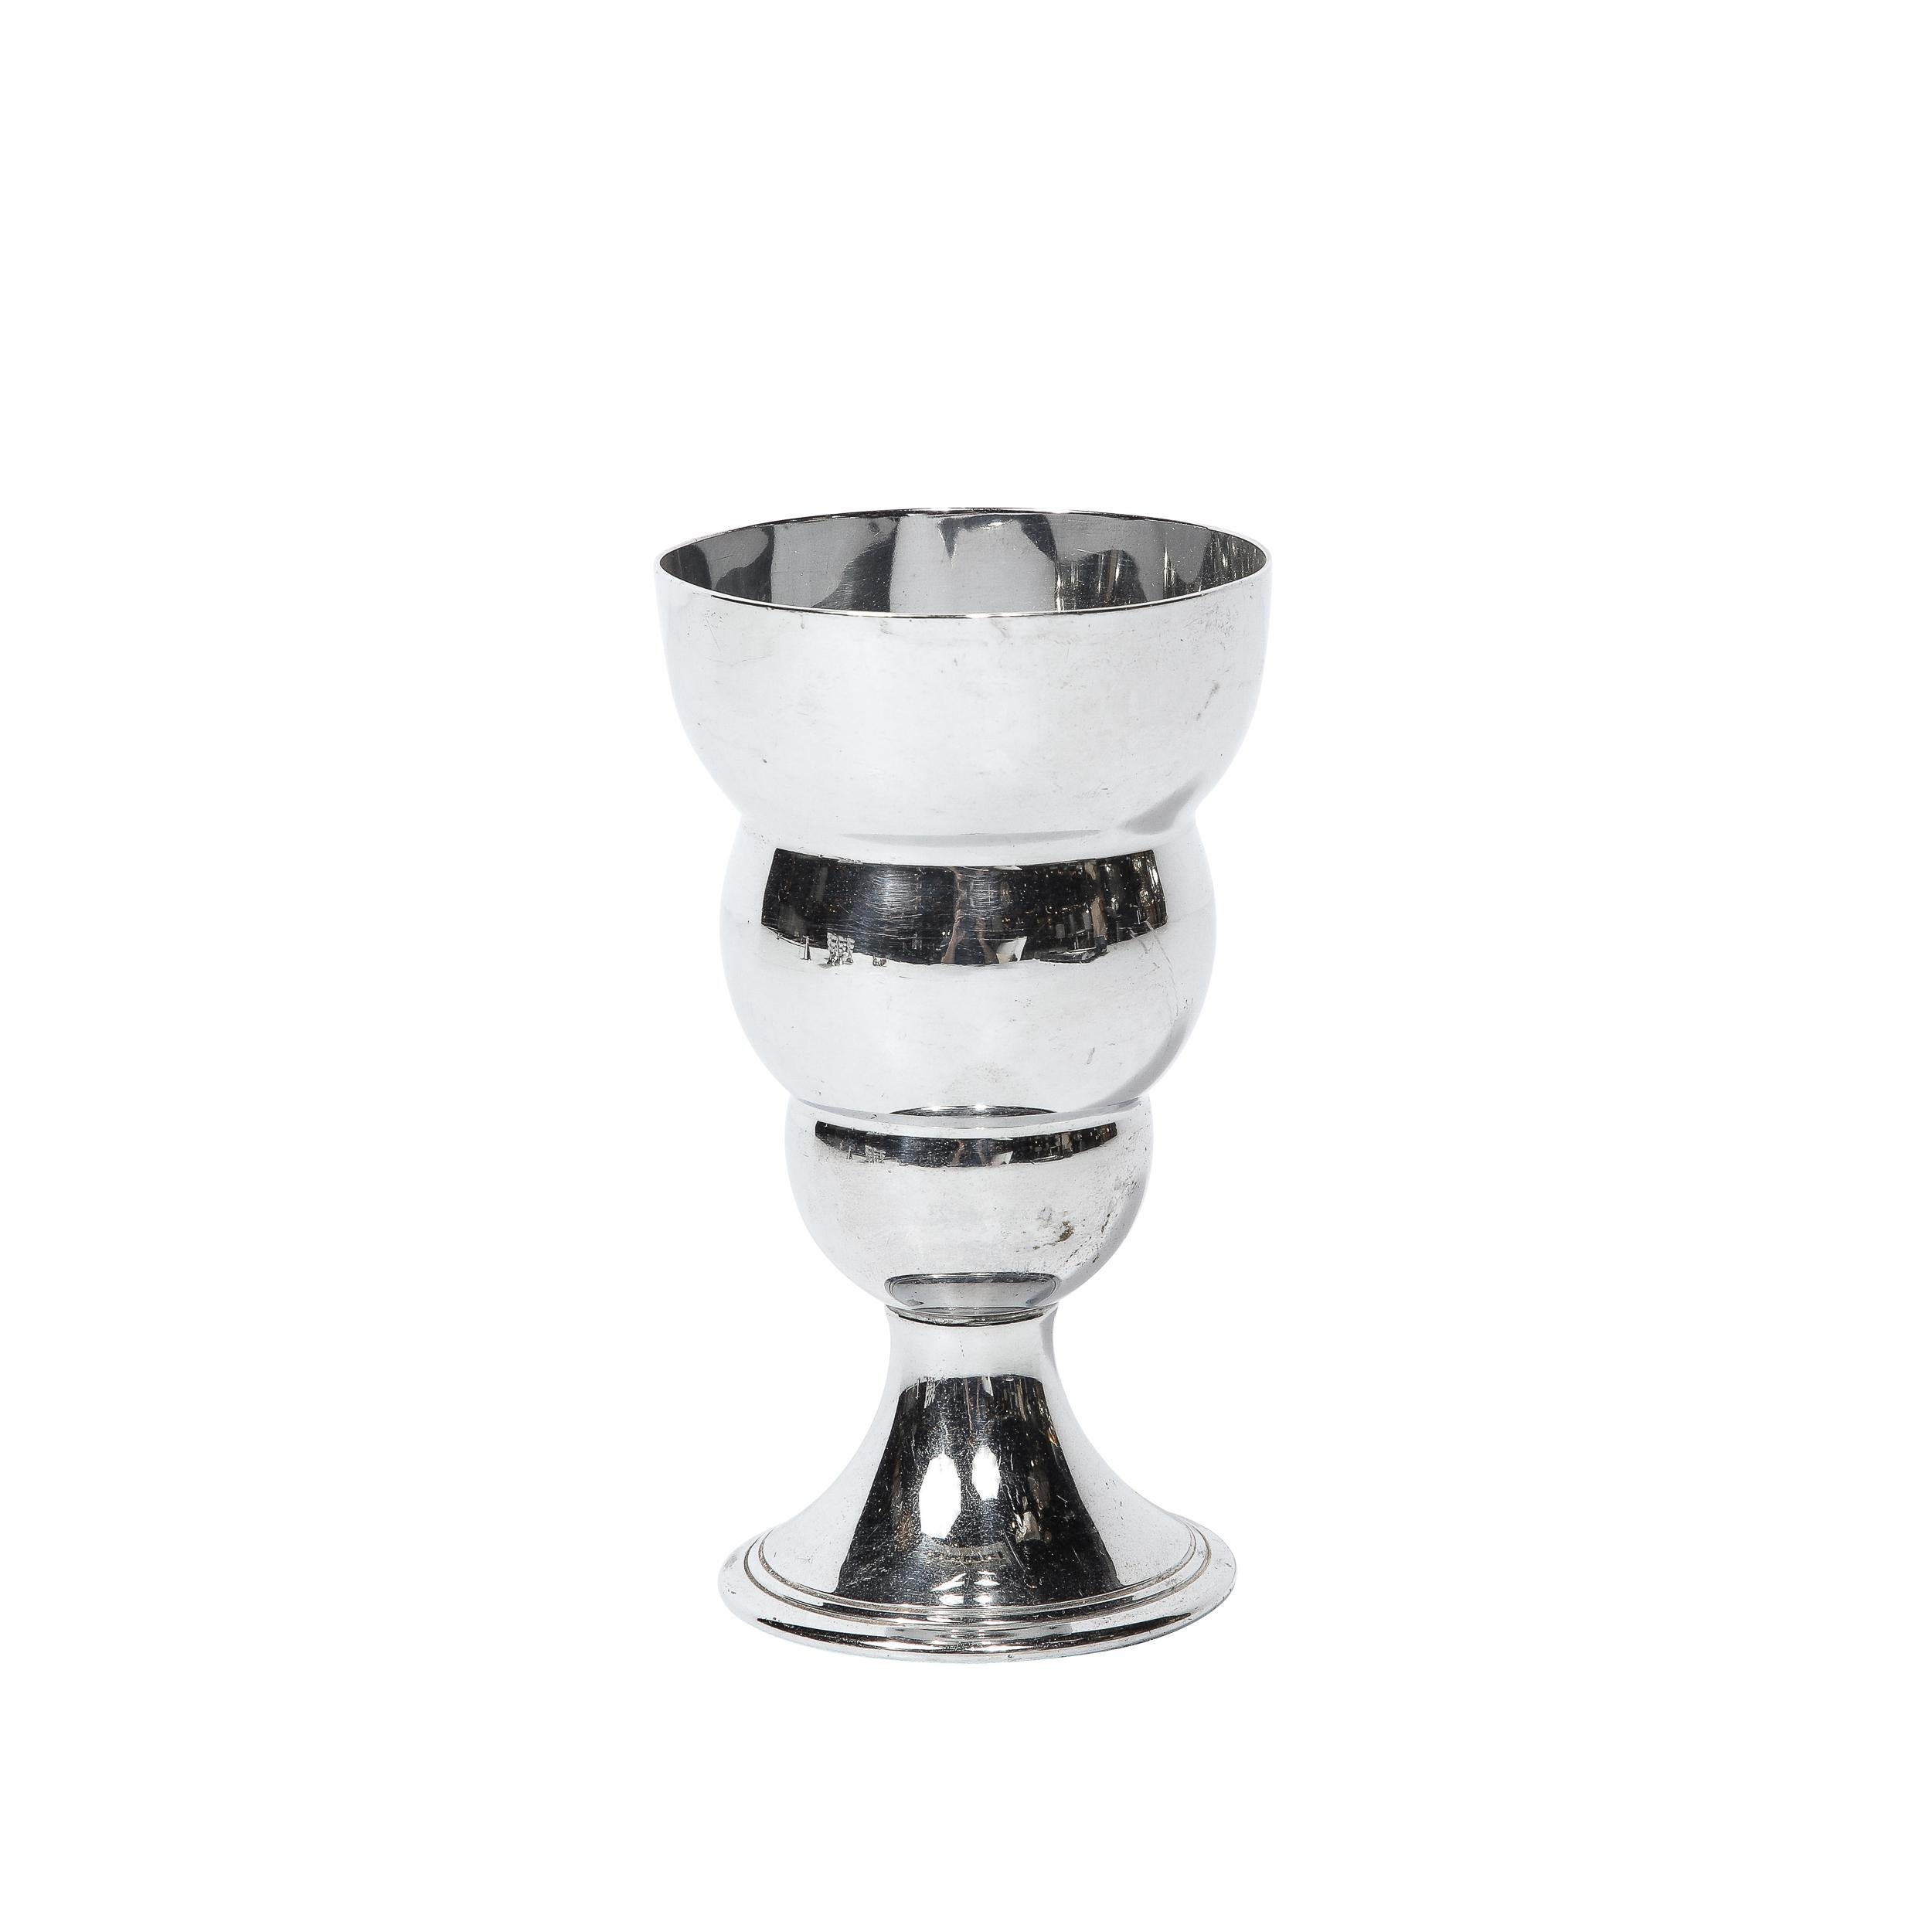 The Set of Six Art Deco Cocktail Glasses in Chrome American, Circa 1930 is a brilliant example of material and design of the era. It features a stacked spherical design rising from the base of the cups, rounded with a great feel in the hand,